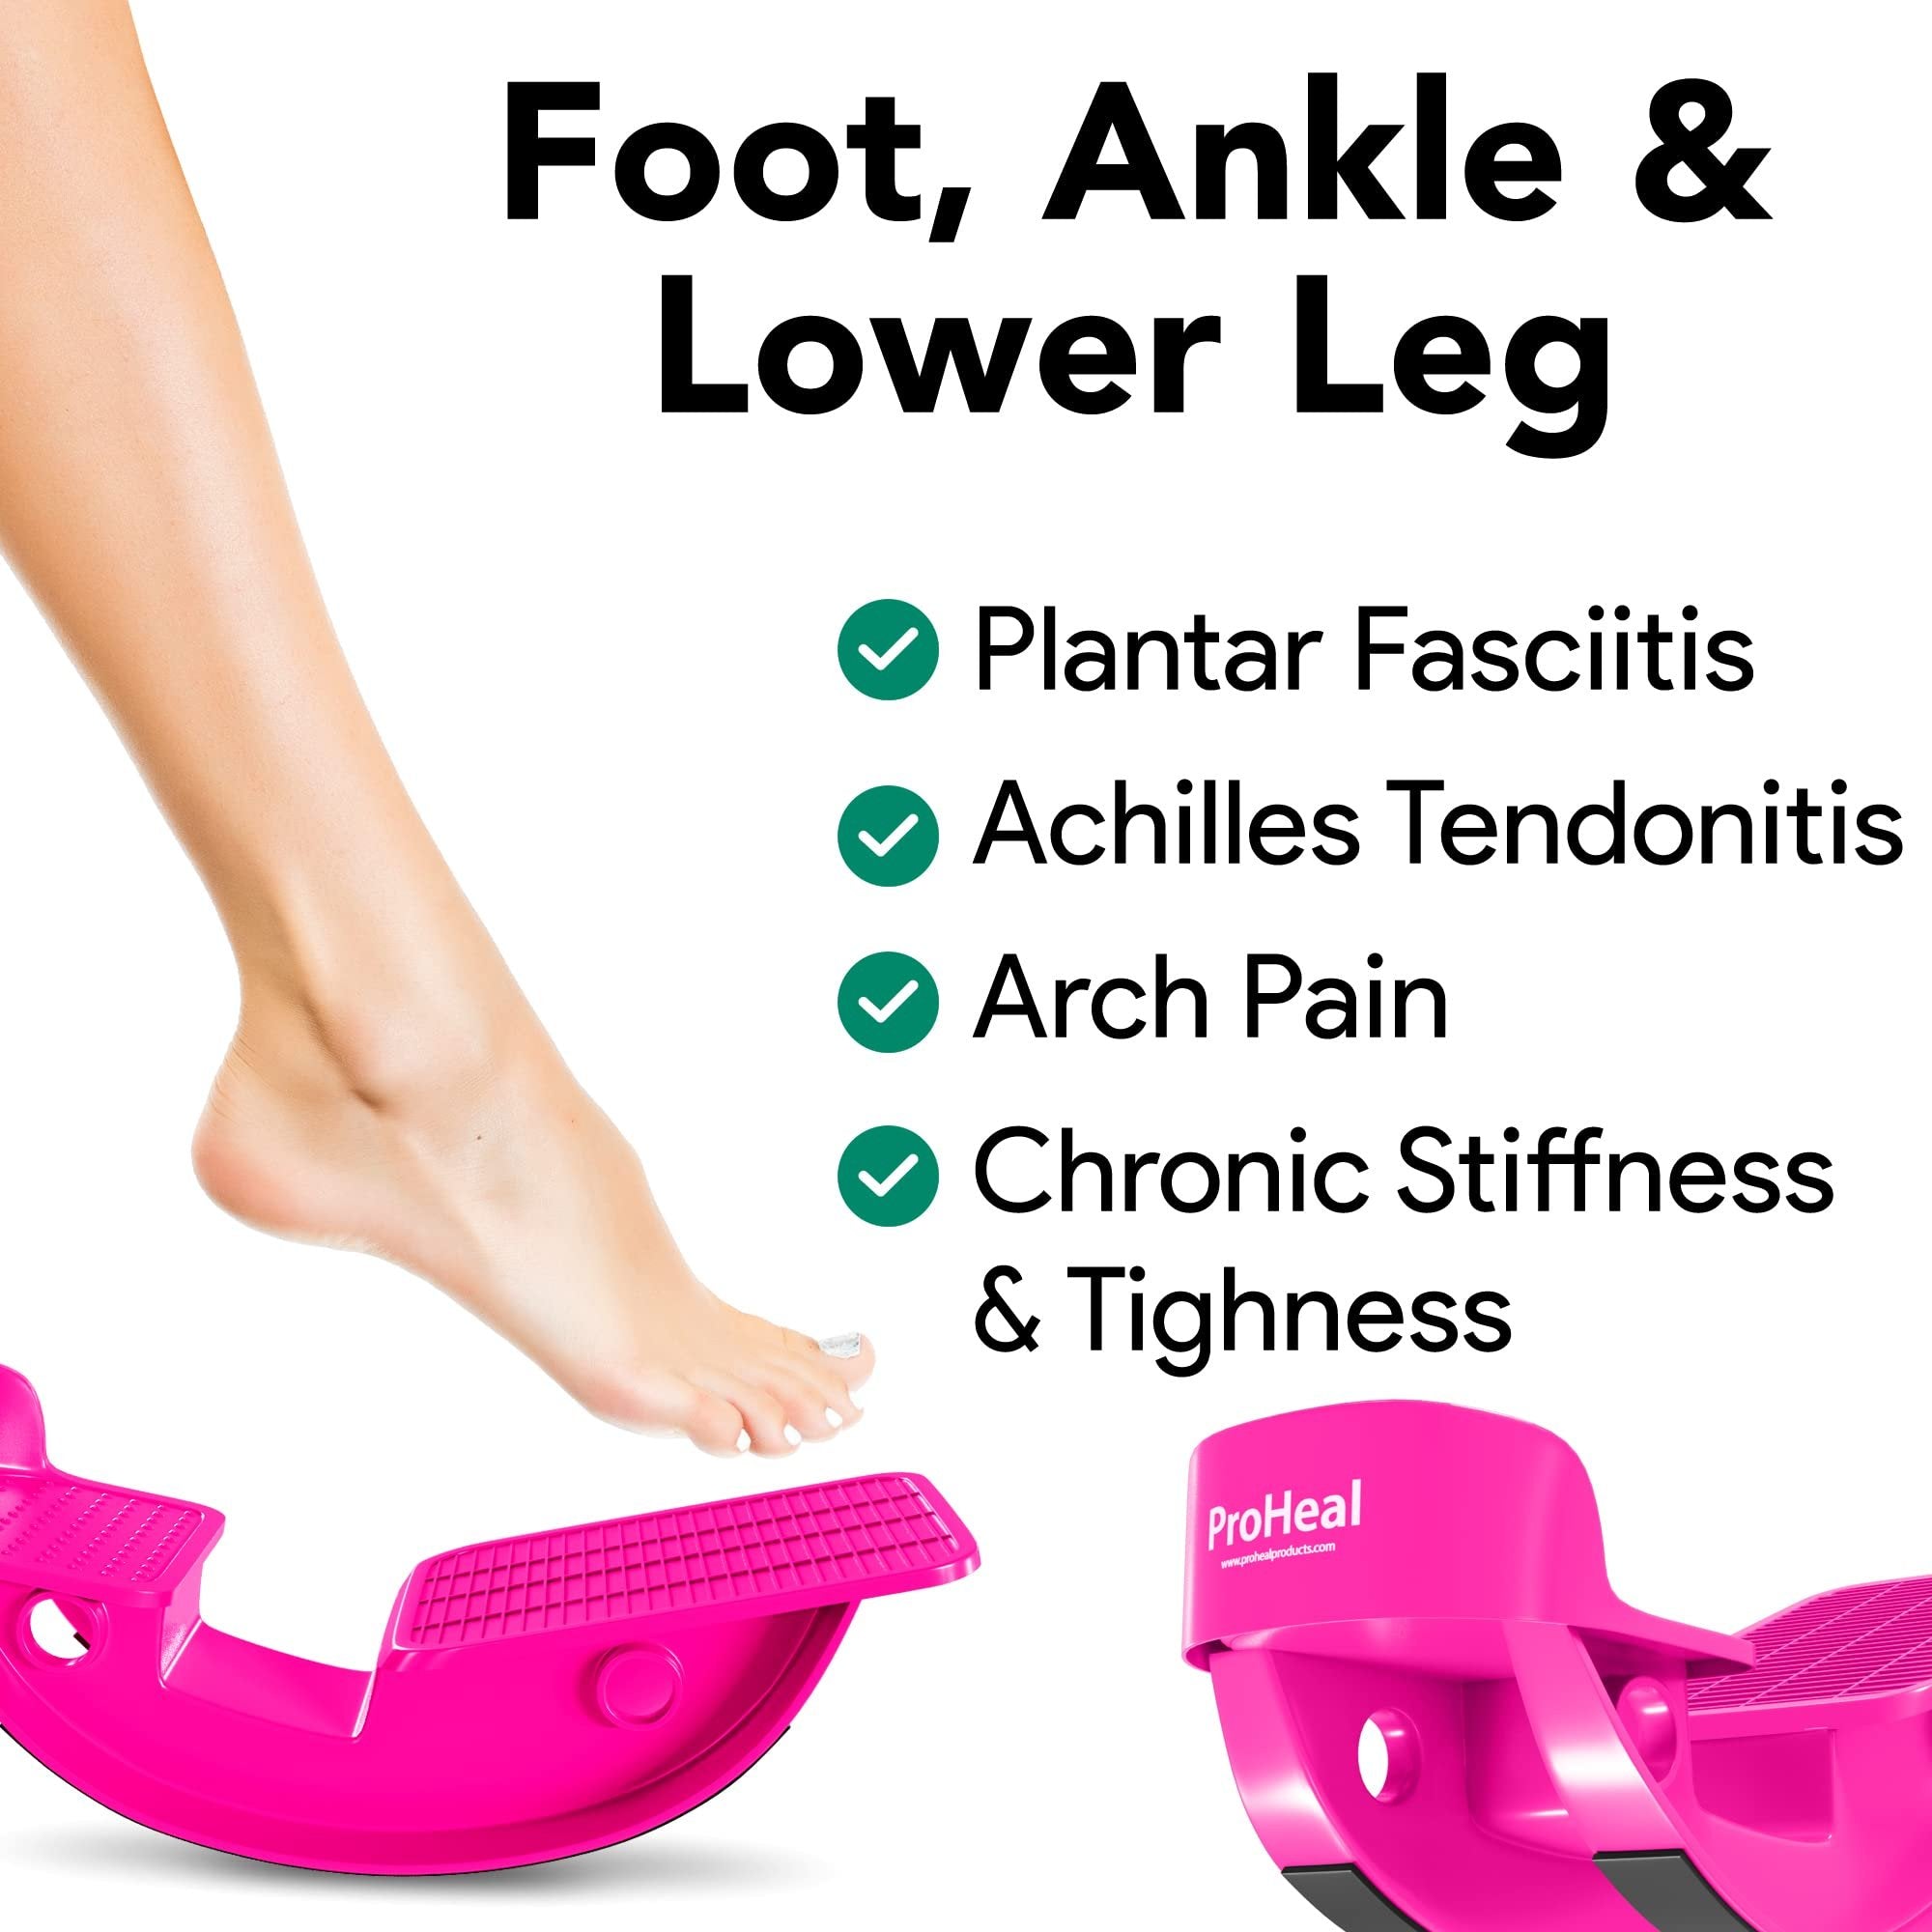 ProHeal Pink Plantar Fasciitis Relief Foot Rocker - Calf Stretcher with Spiked Ball Massager - Achilles Tendonitis Calf, Foot, Heel, and Ankle Stretcher - Lower Leg Pain Relief